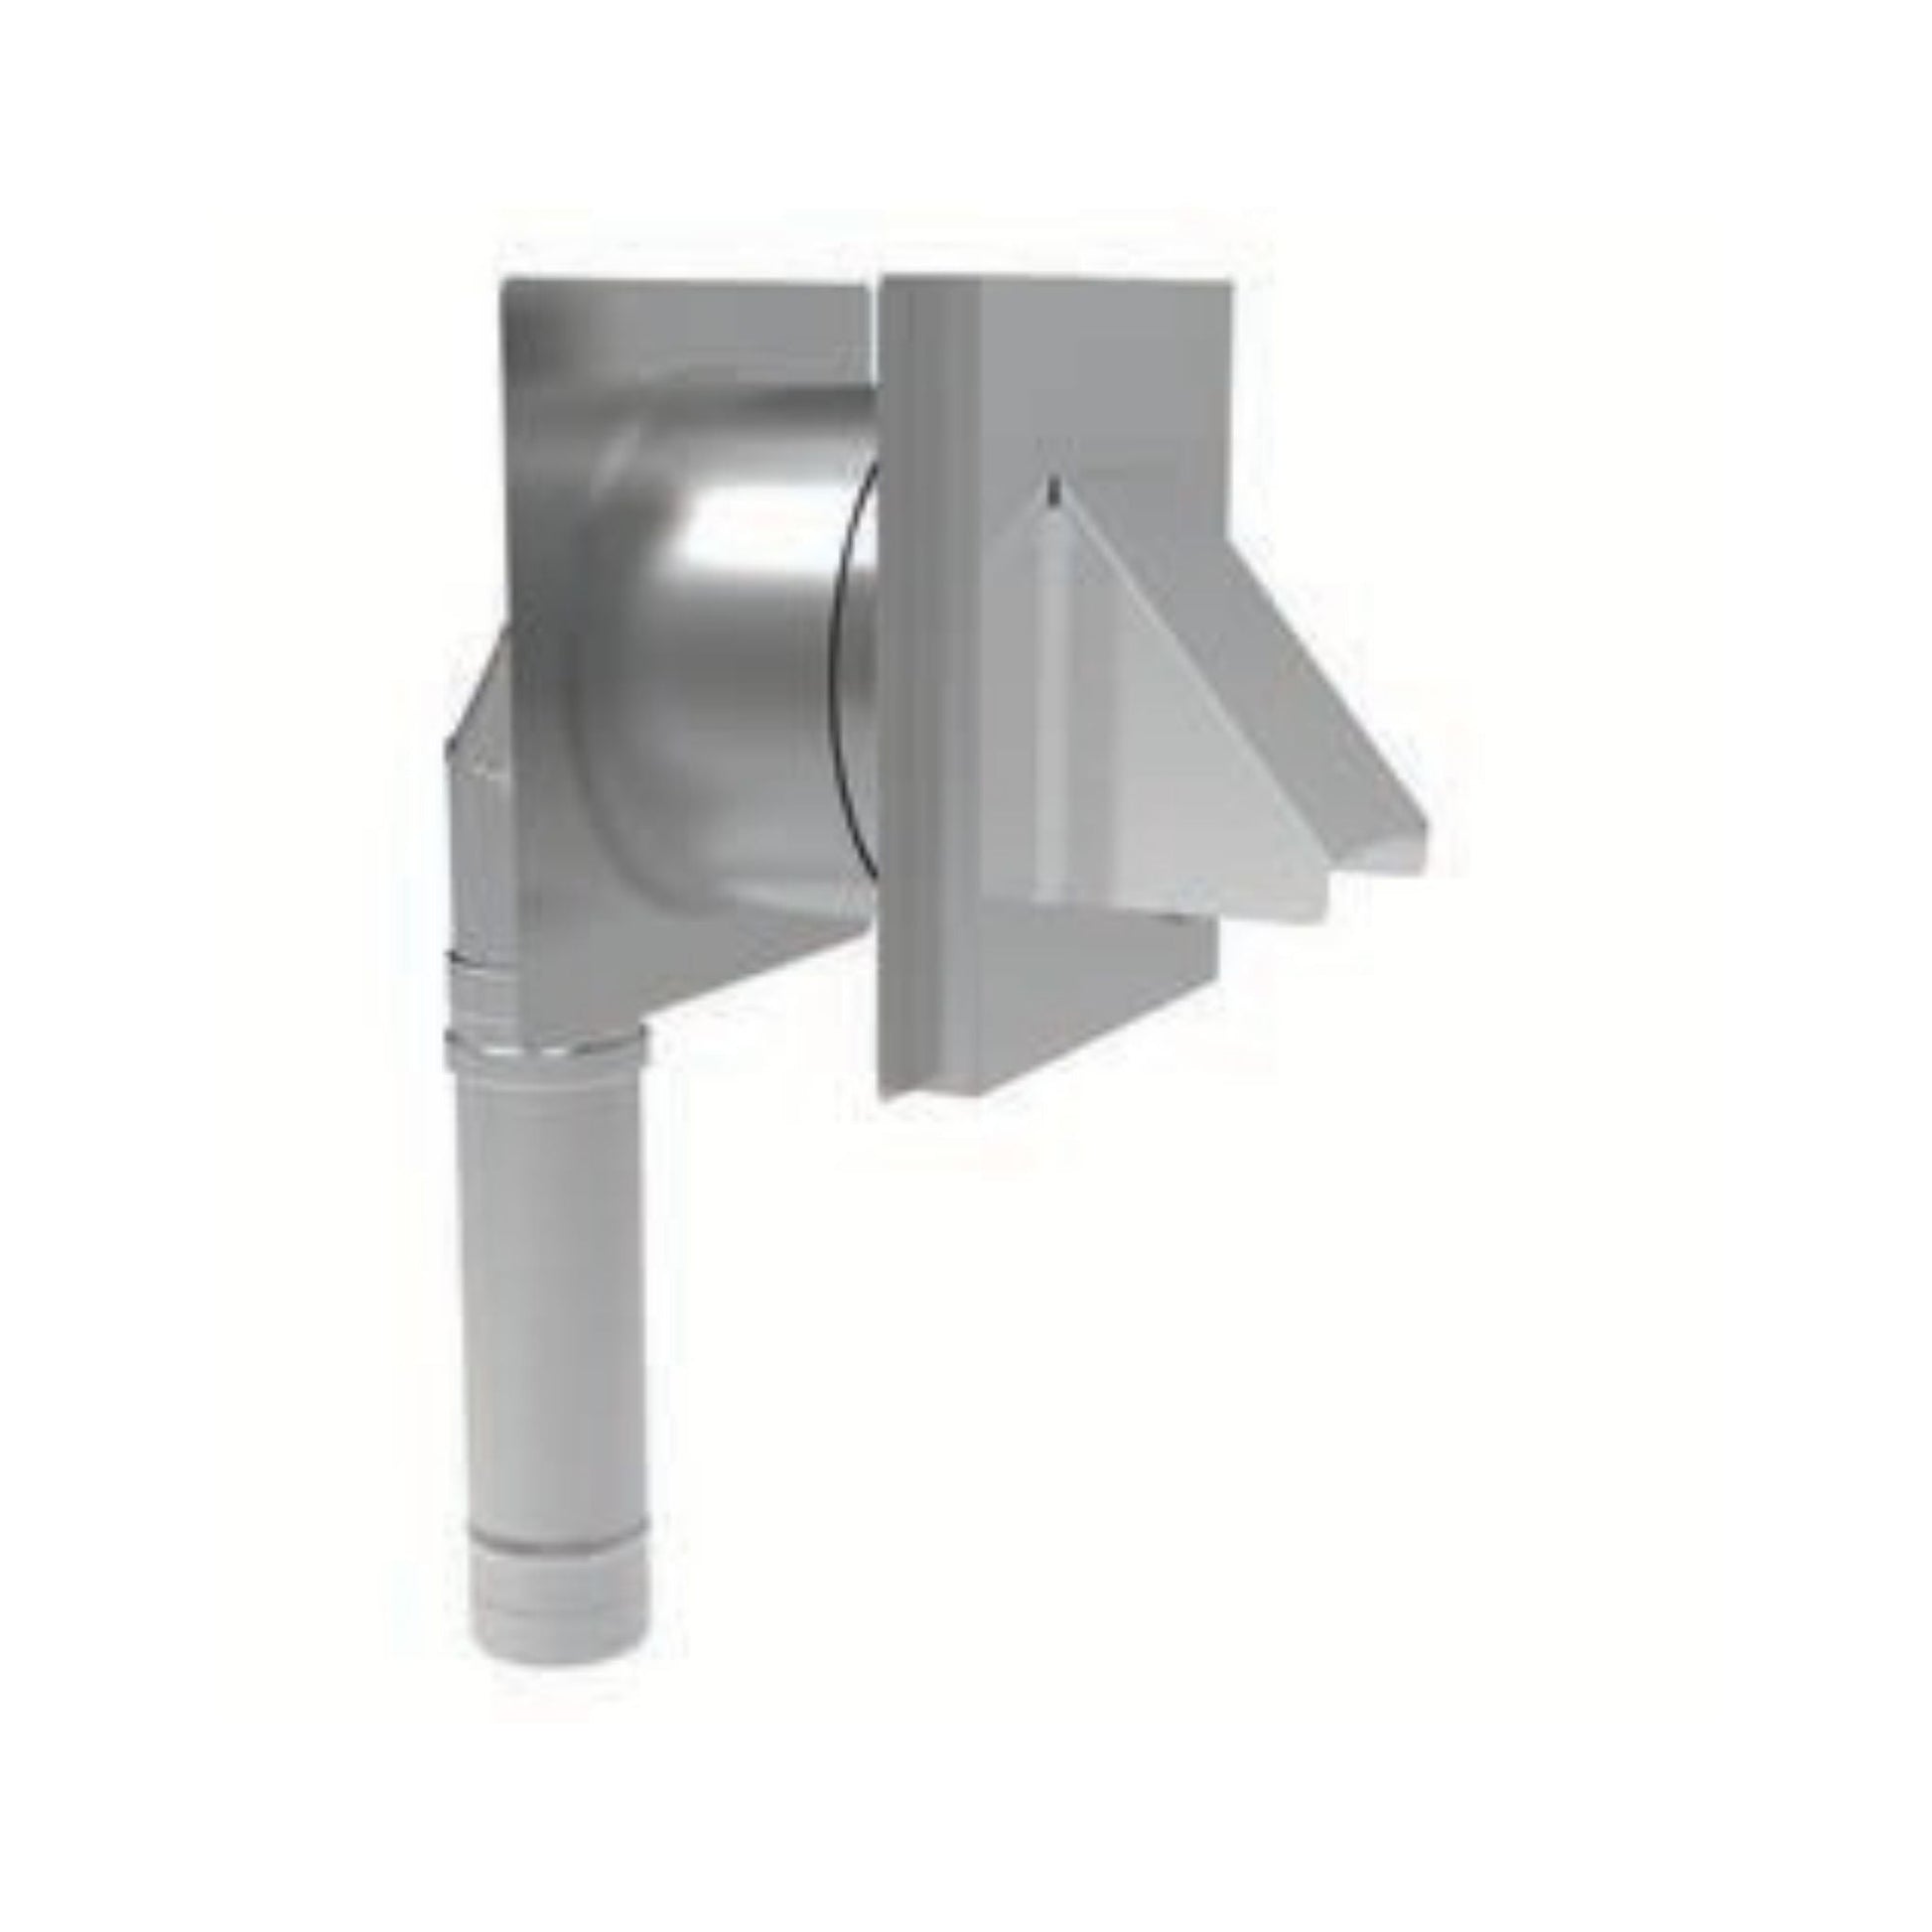 DuraVent FasNSeal 4" Standard Wall Mount Insulated Kit